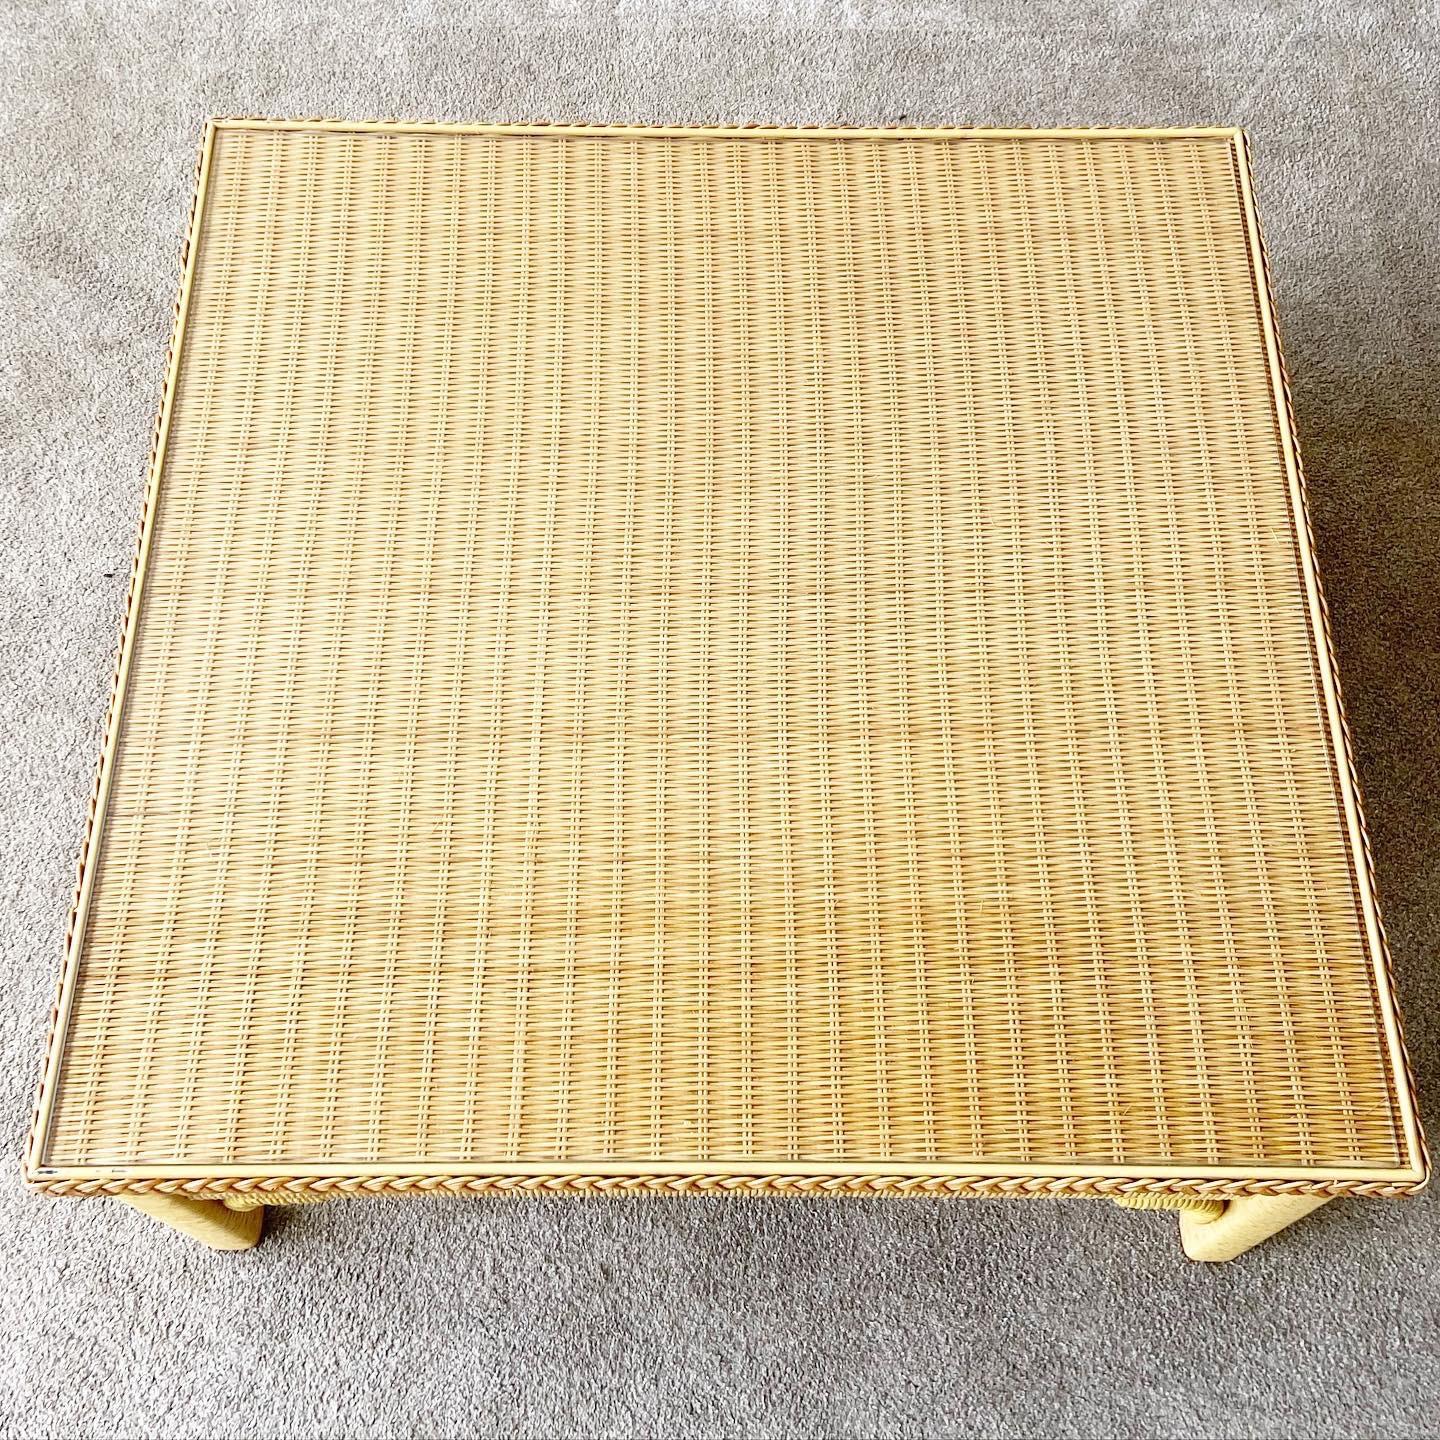 Exceptional bohemian coffee table by Henry link. Table features woven wicker and rattan frame with a glass top. There are no marks which read Henry Link on this table. 